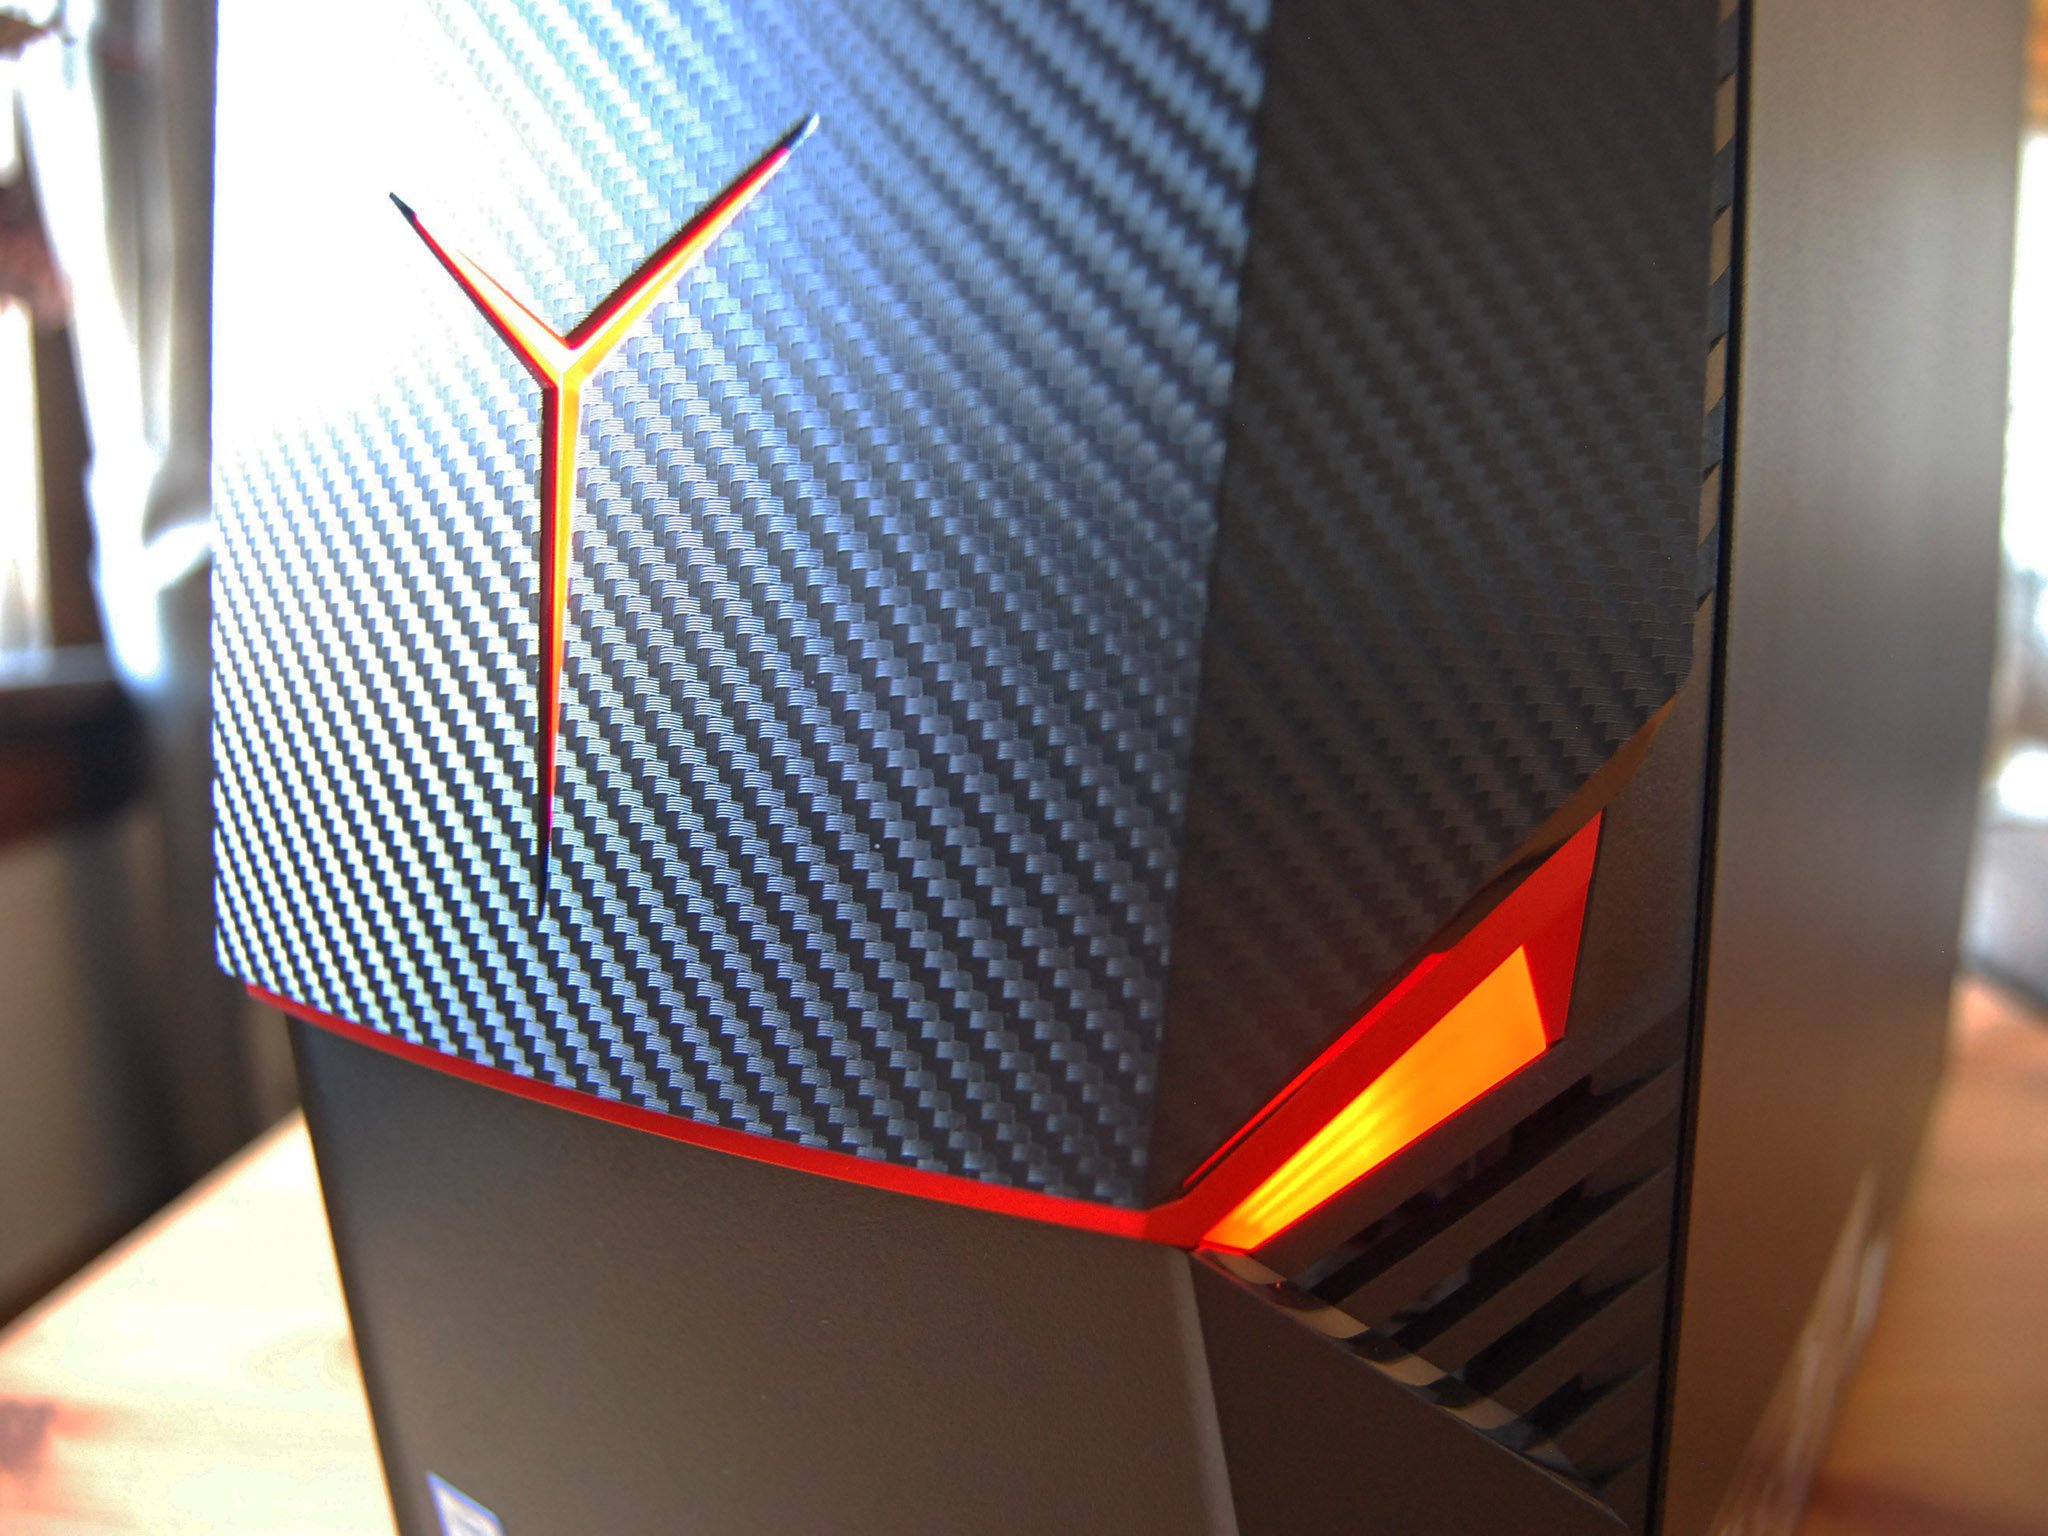 Lenovo Legion Y720 Tower review: A gaming PC that packs impressive performance | Windows Central